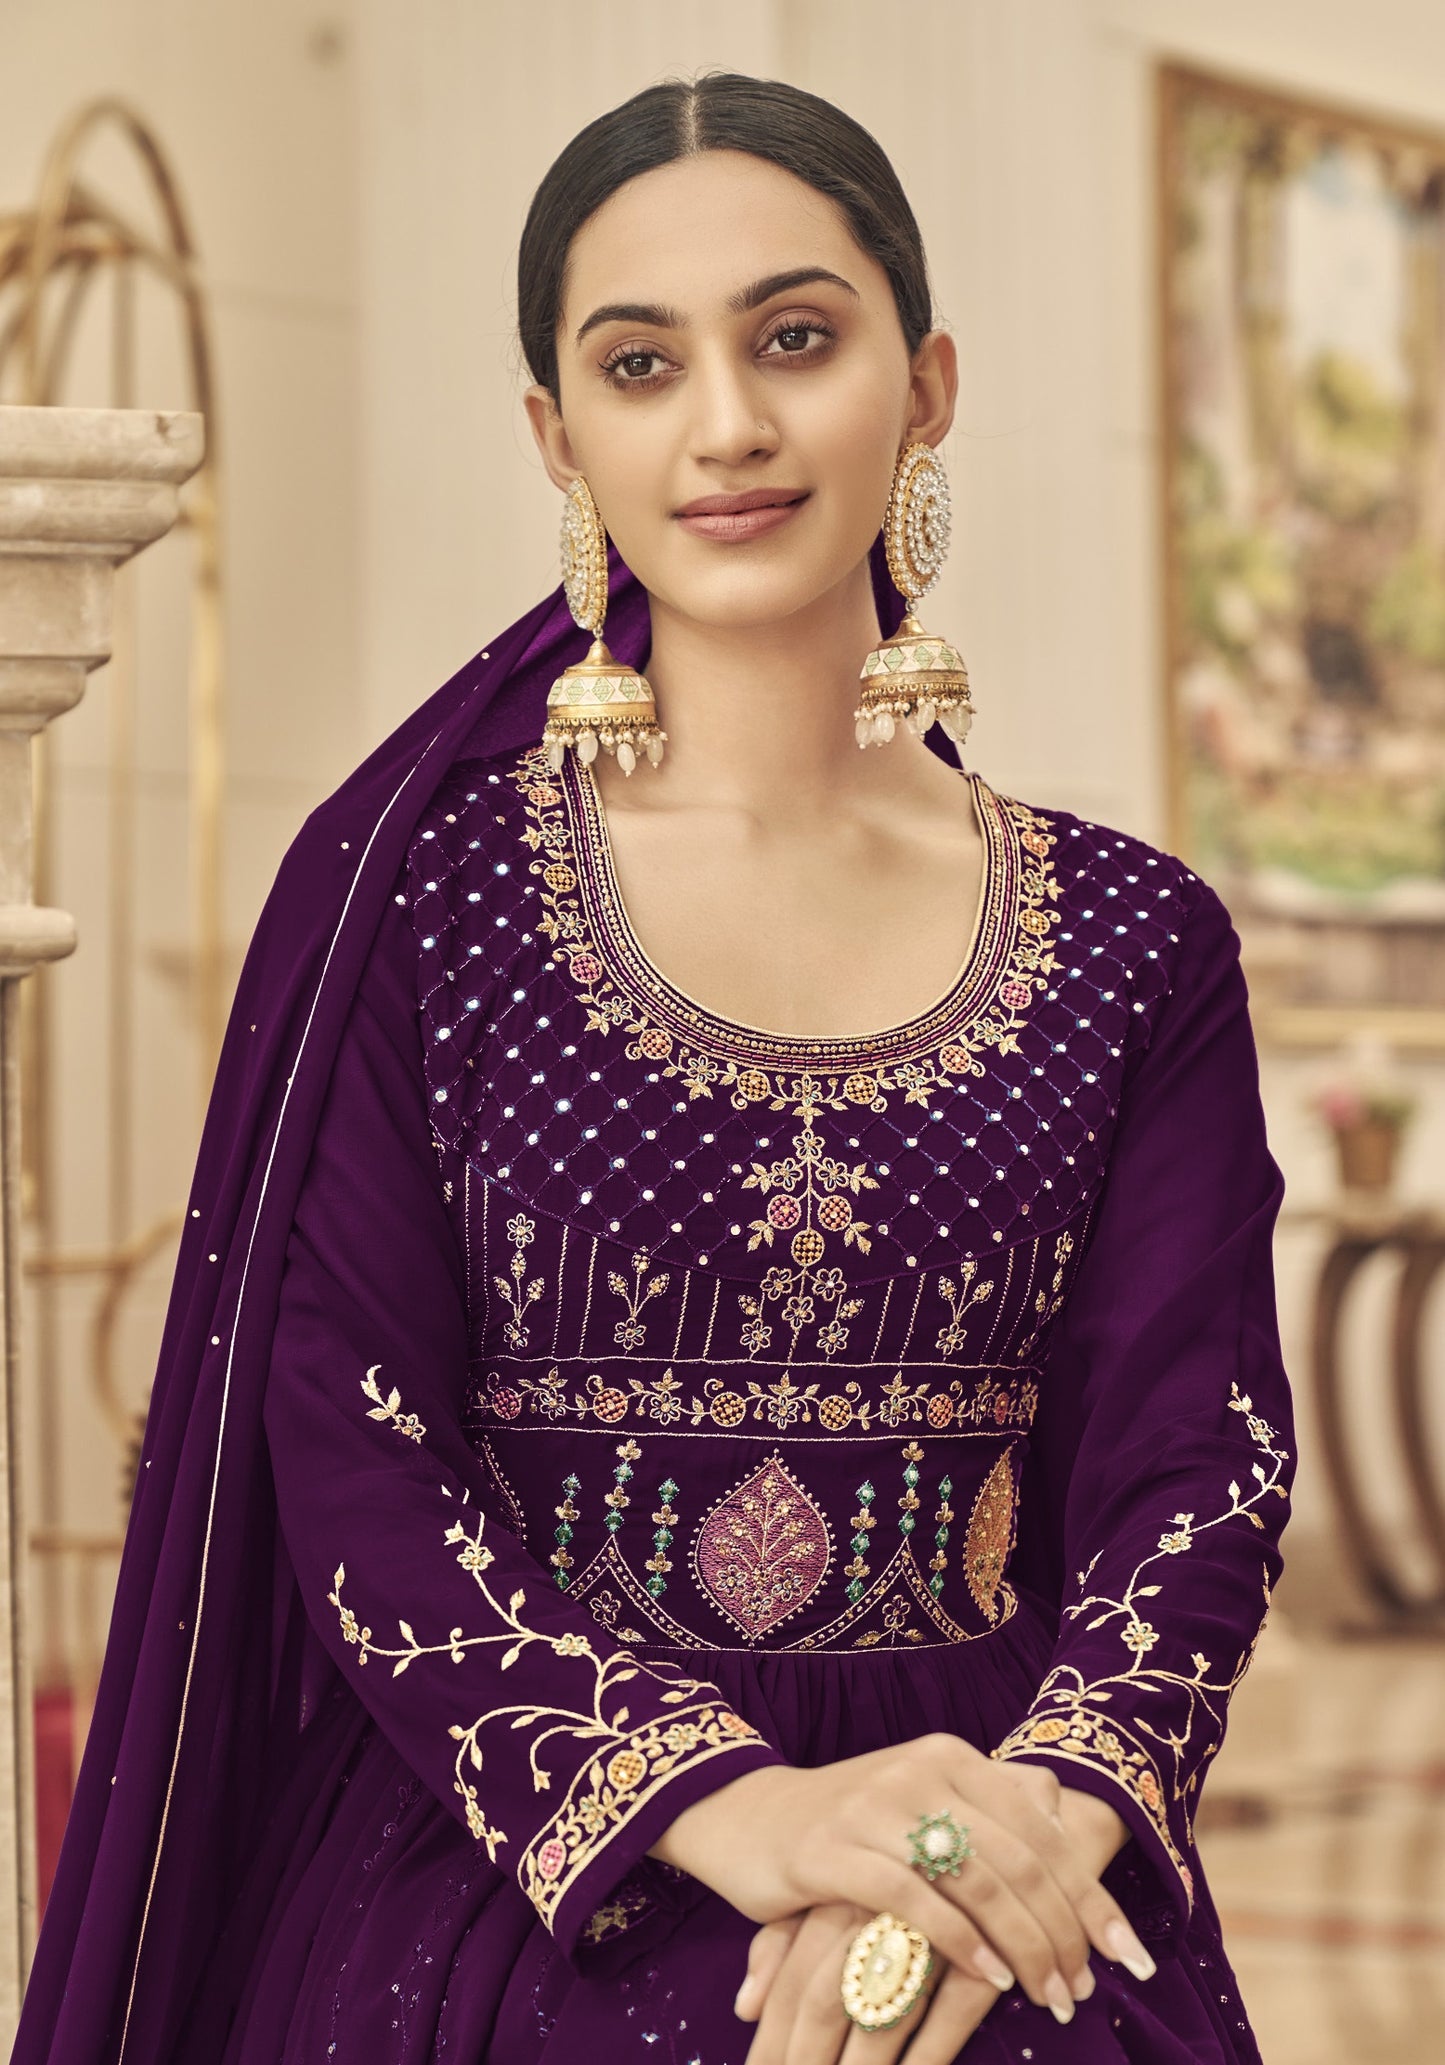 Purple Color Heavy Faux Georgette With Sequence Work Anarkali Salwar Suit